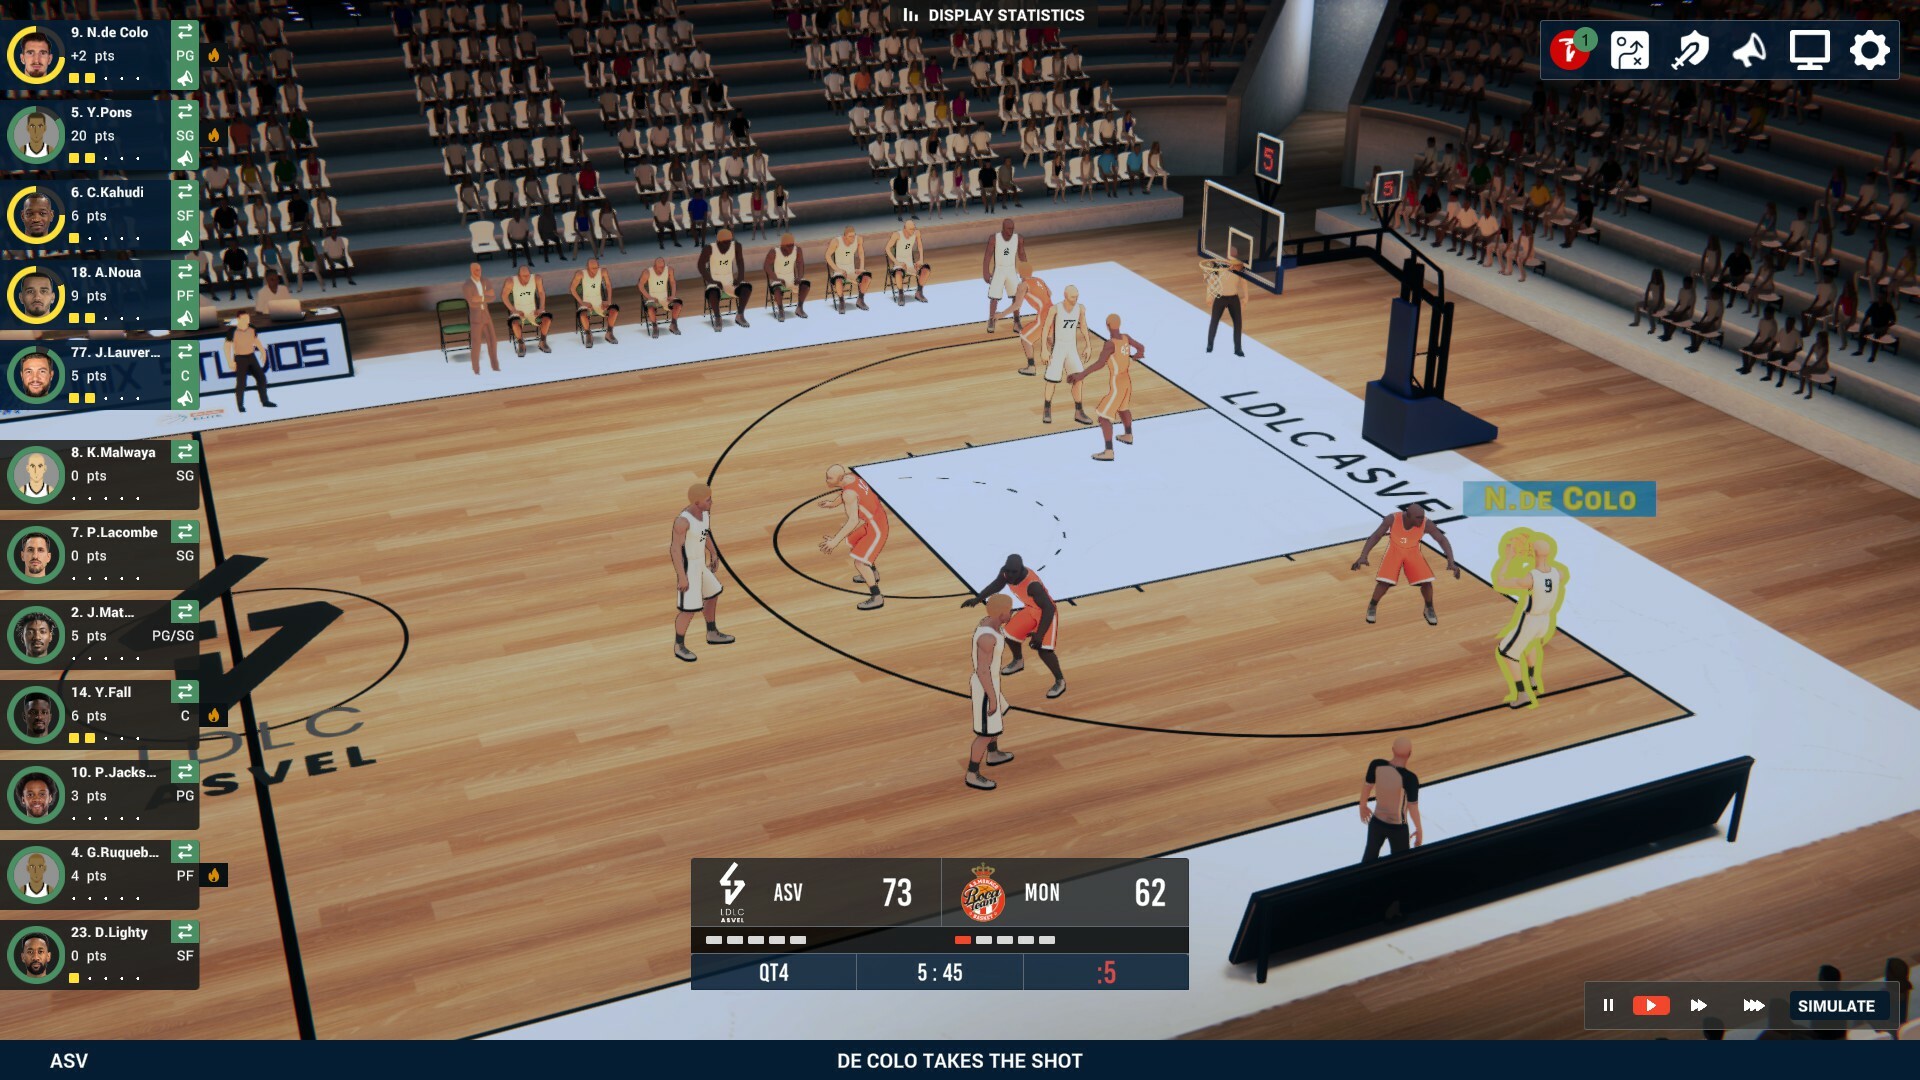 Save 50% on Pro Basketball Manager 2023 on Steam